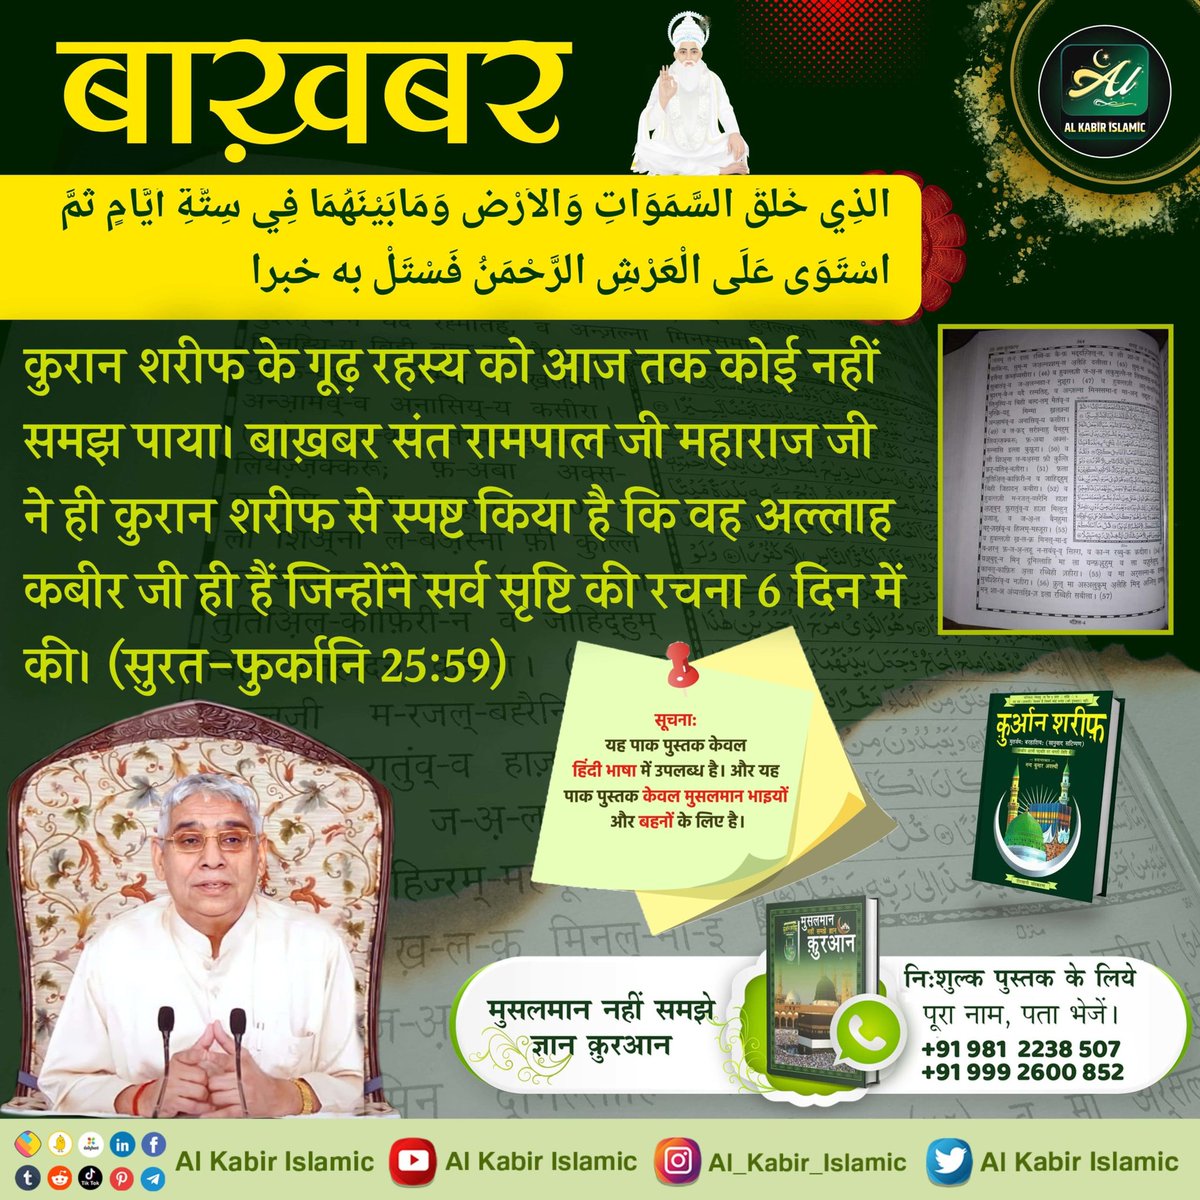 #Allah_Is_Kabir
According to the Holy Quran Sharif: In Surah Al Furqan 25:58 & 59 – Prophet Muhammad’s God is referring to some other Supreme God and is asking Prophet Muhammad to sing the glory of Allah Kabir who is immortal and is worthy to worship.
Baakhabar Sant Rampal Ji